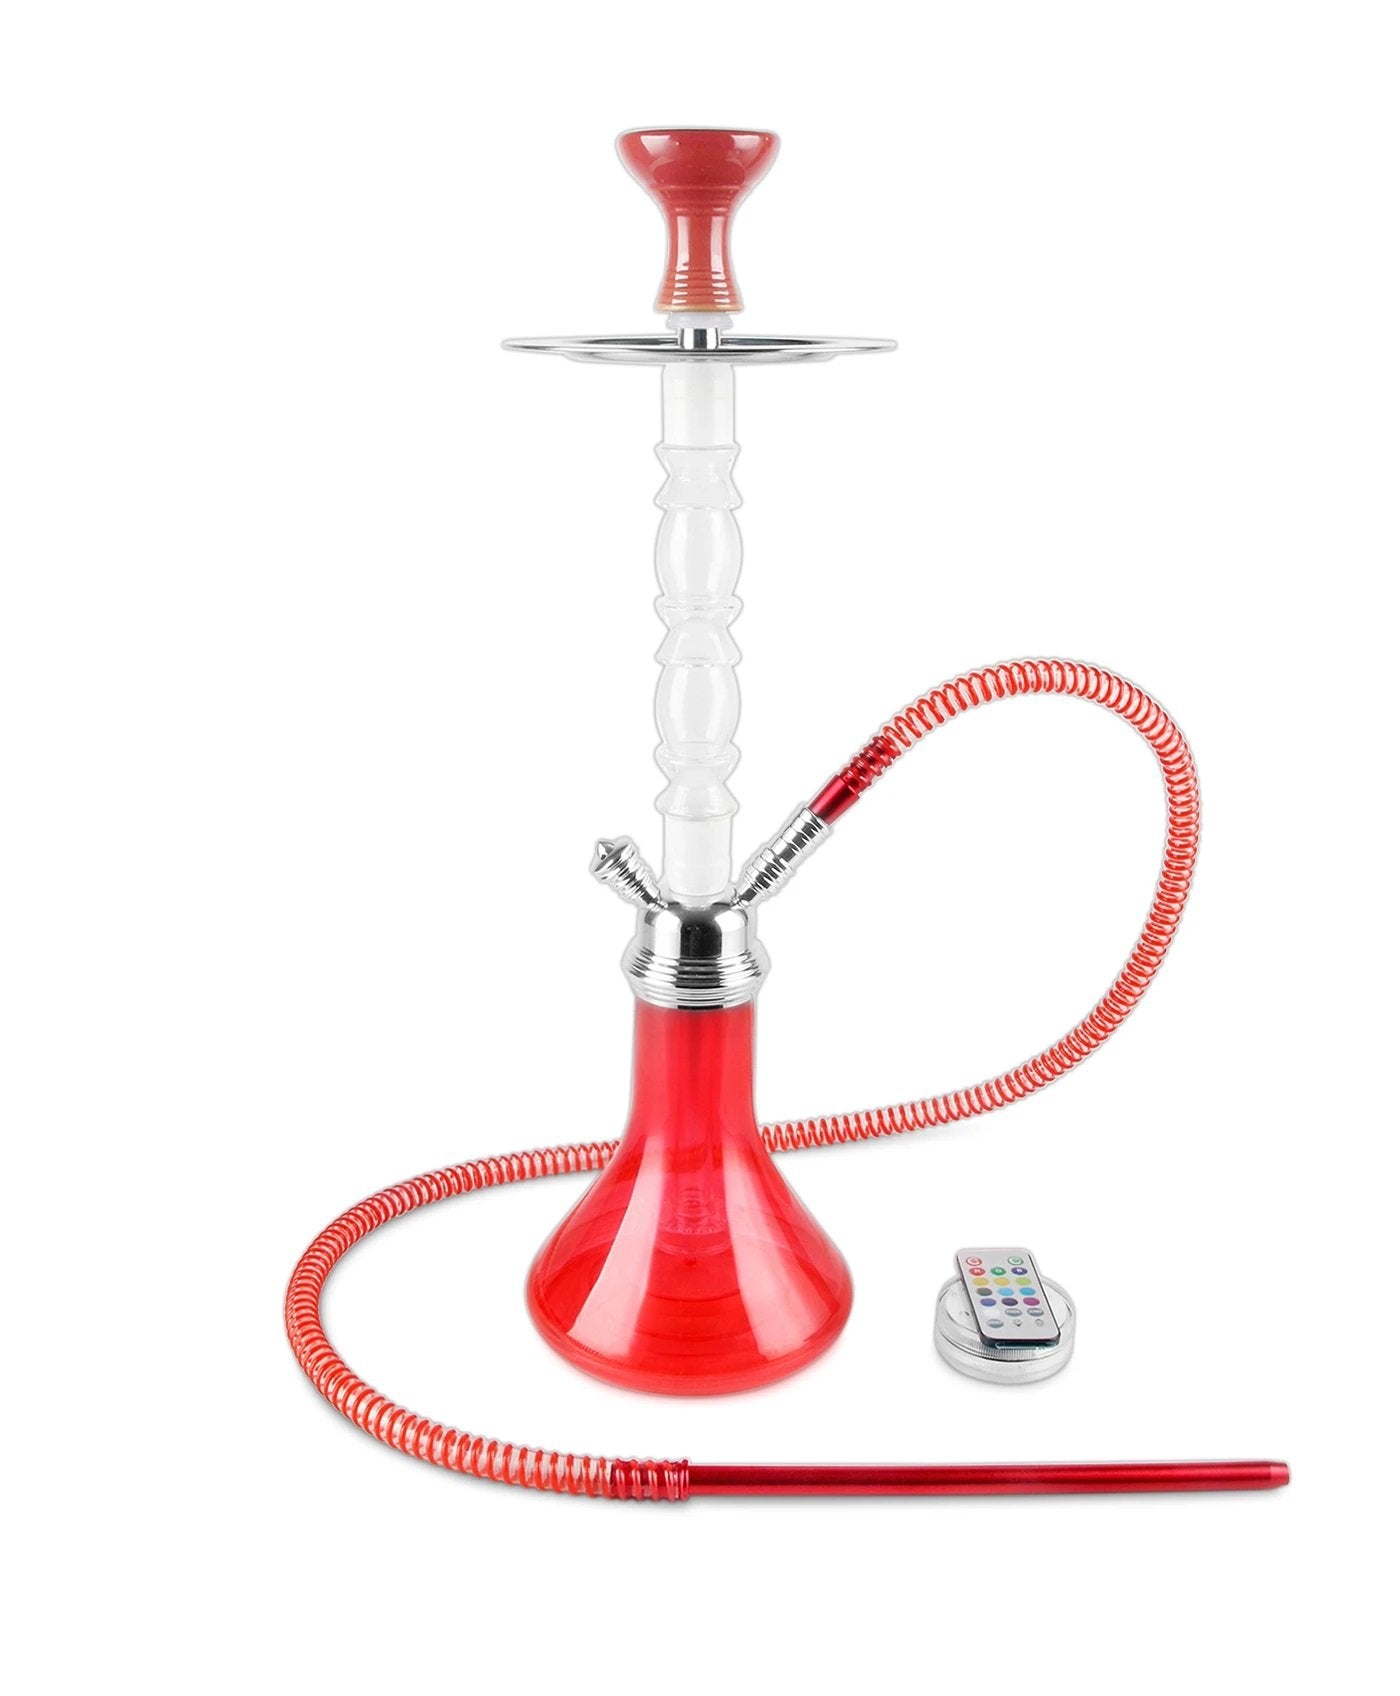 Rip Acdrylic Hookah 24" Clear Stem with red base and led light controler